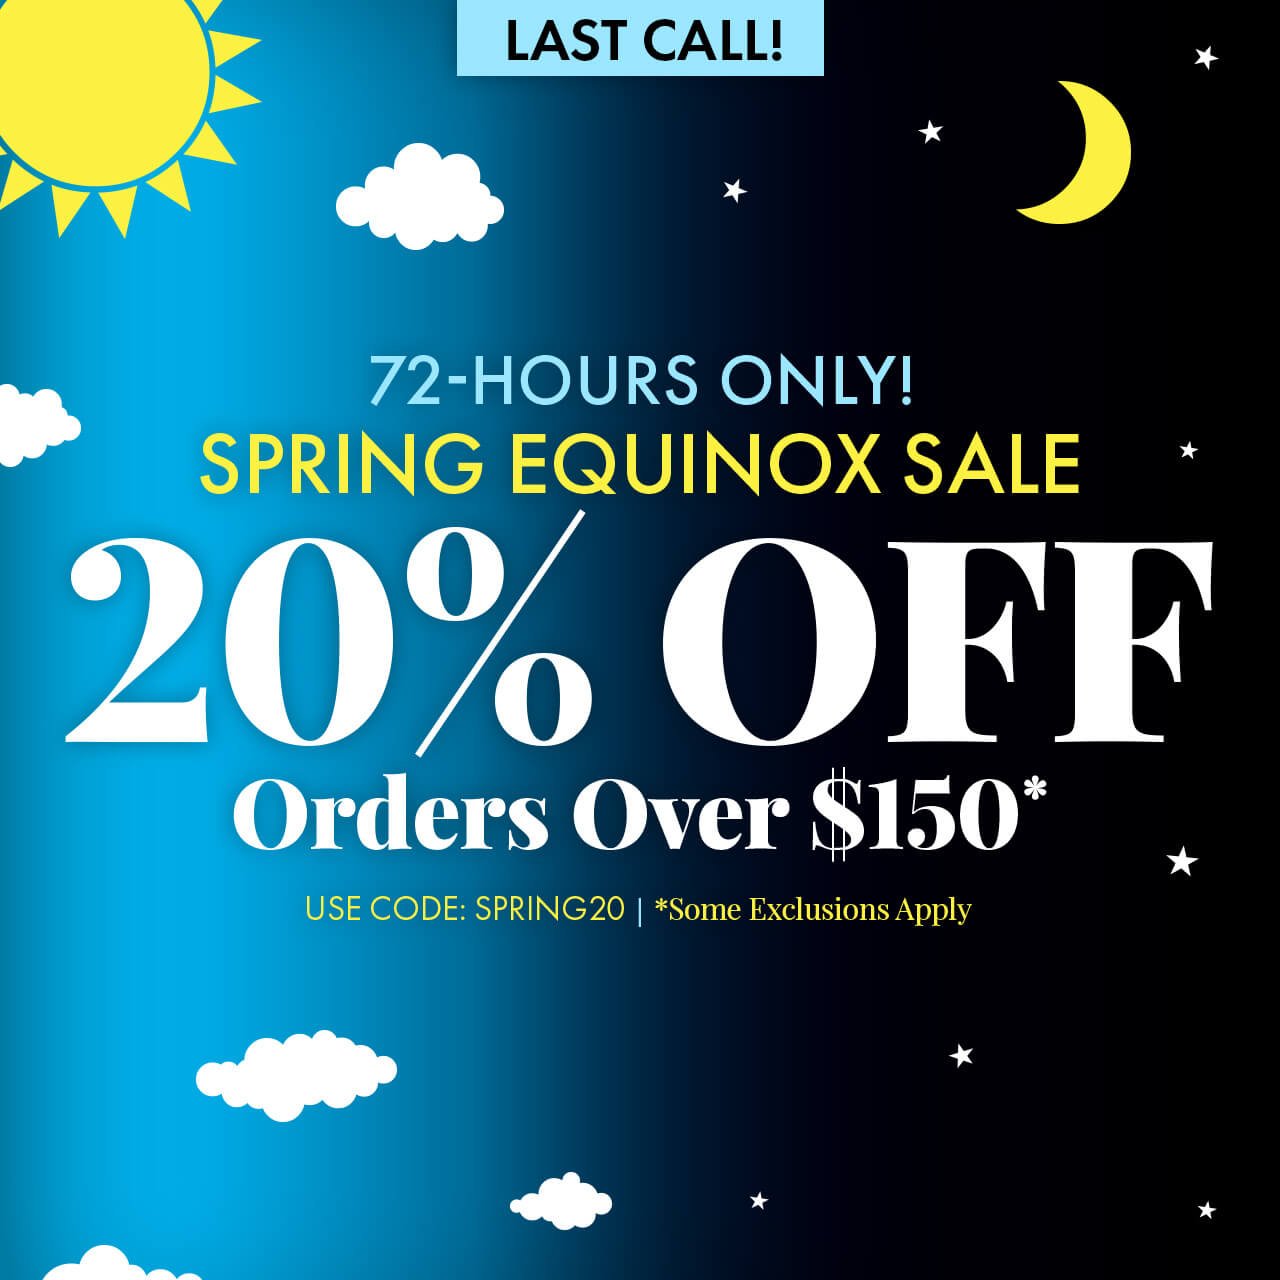 72-hour Spring Equinox Sale. 20% Off Orders Over \\$150. Use Promo Code SPRING20